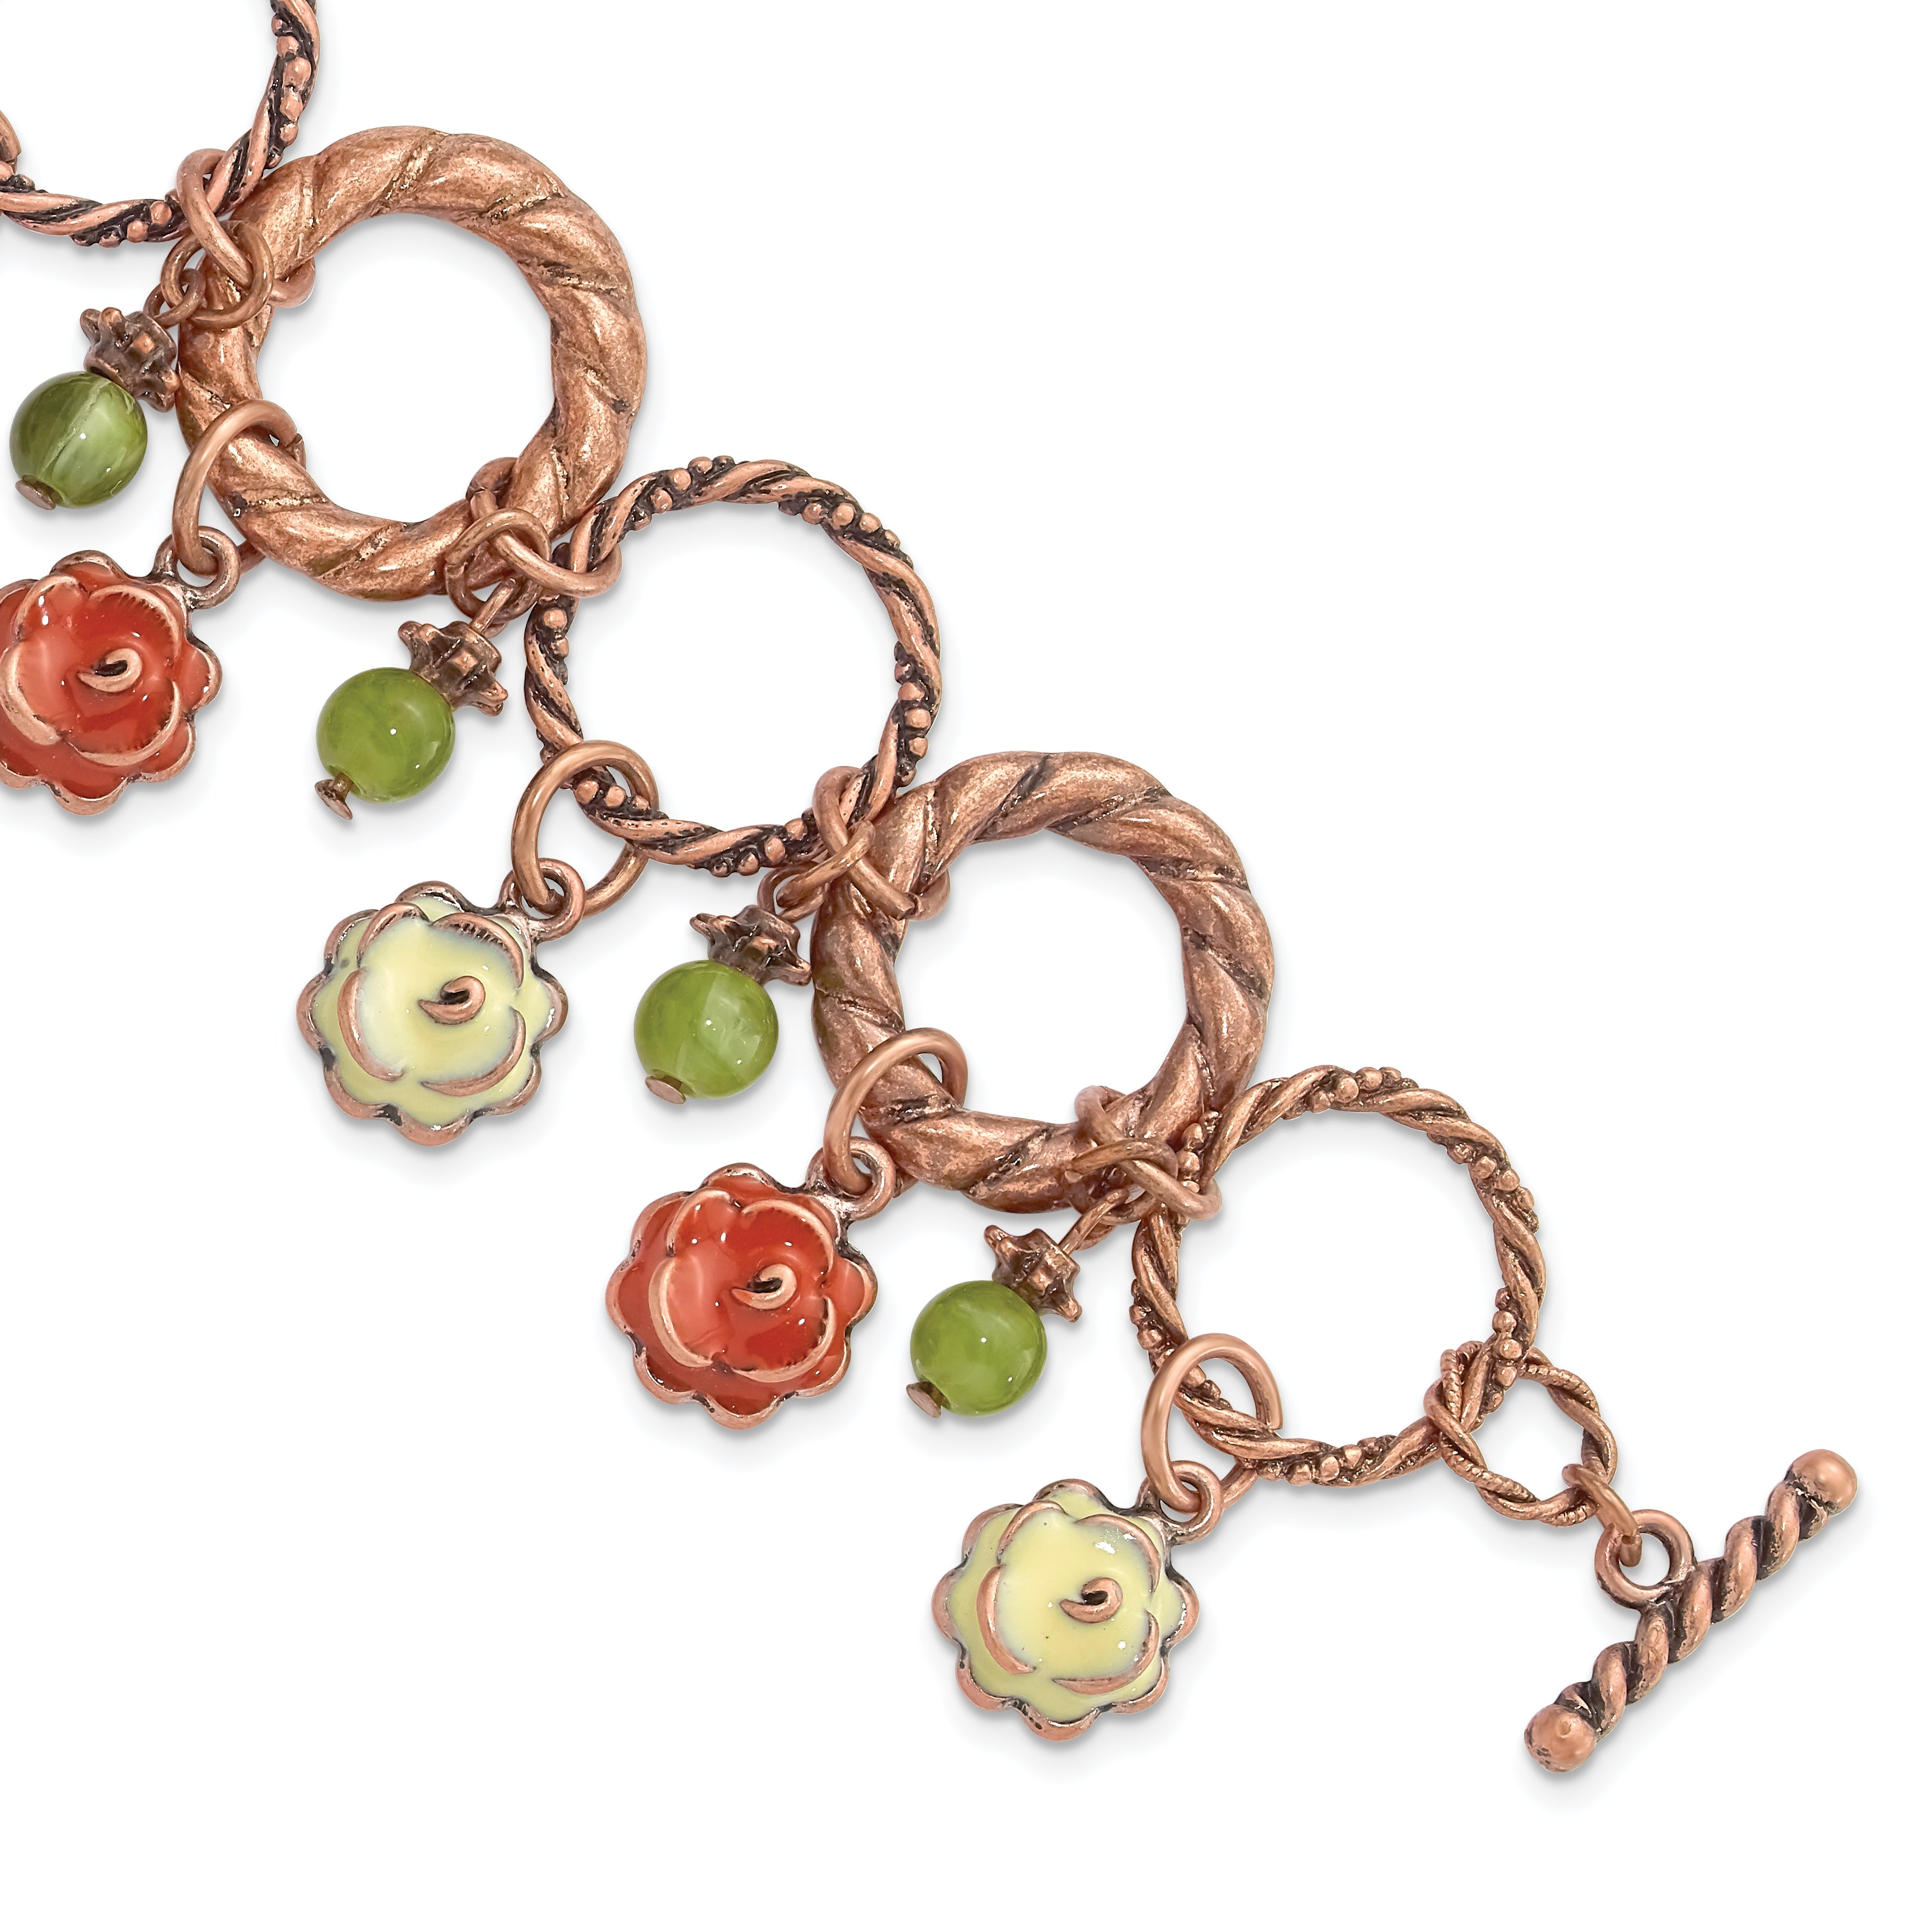 1928 Jewelry Copper-tone Textured Link Orange and Light Green Enamel Flower Green Acrylic Bead Dangles 7 inch Toggle Bracelet